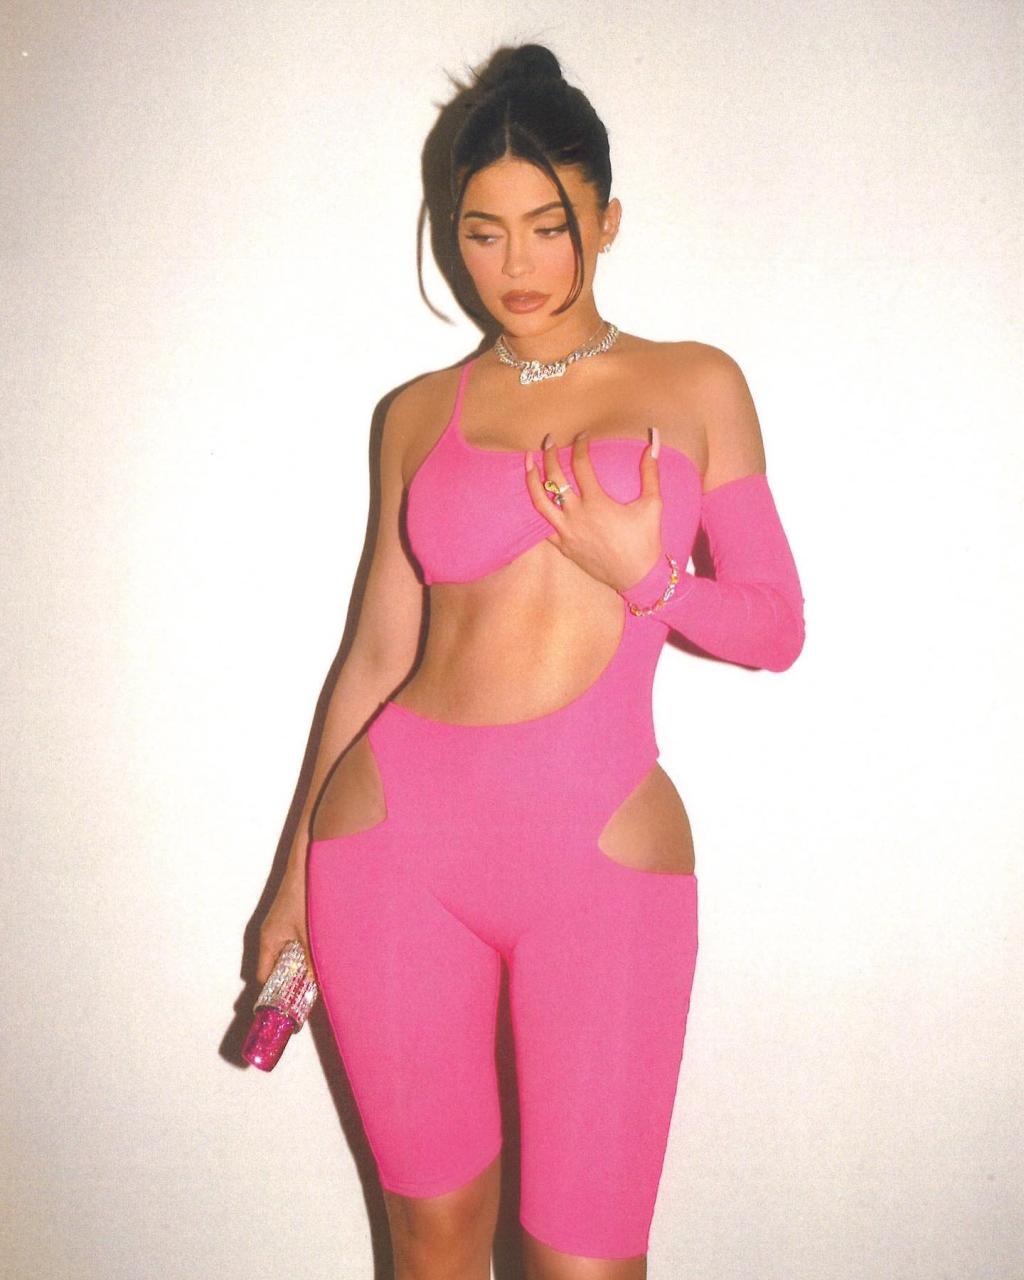 Kylie Jenner's 'boob grab' could signal hidden surgery & there's another reason behind her go-to pose, expert reveals | The US Sun